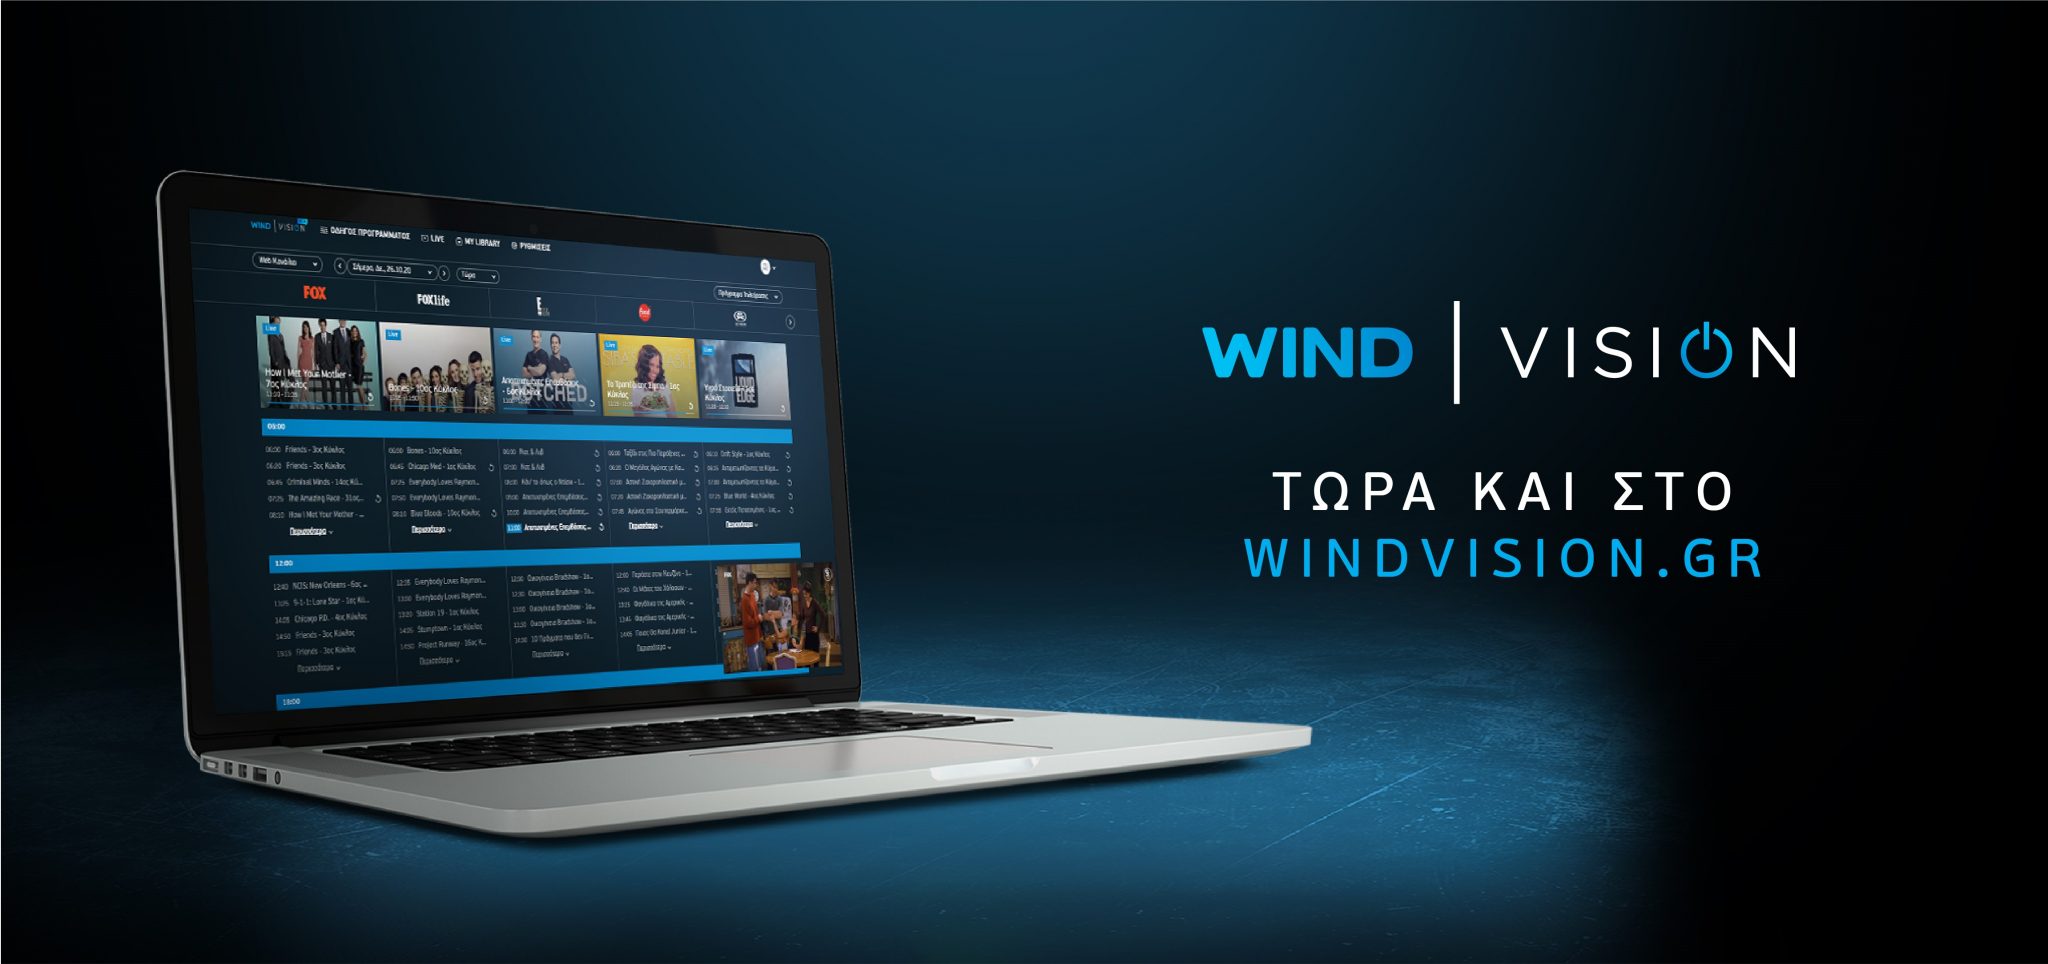 Wind Vision launches on web for PC users - Digital TV Europe